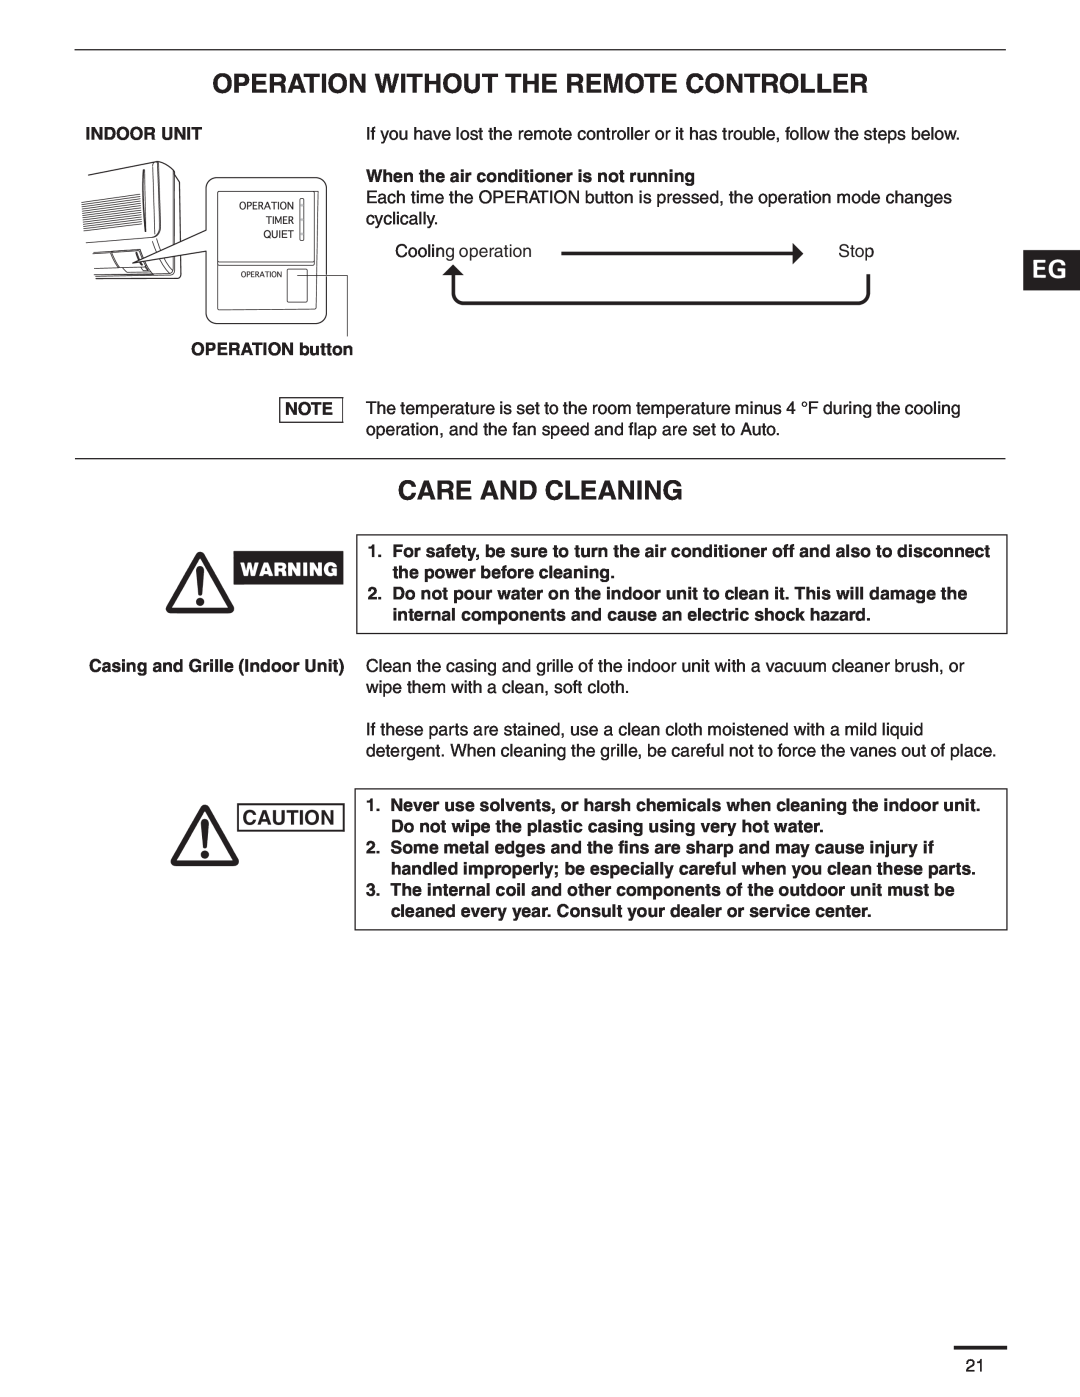 Panasonic CS-MKS9NKU, CS-MKS24NKU, CS-MKS18NKU service manual Operation Without The Remote Controller, Care And Cleaning 